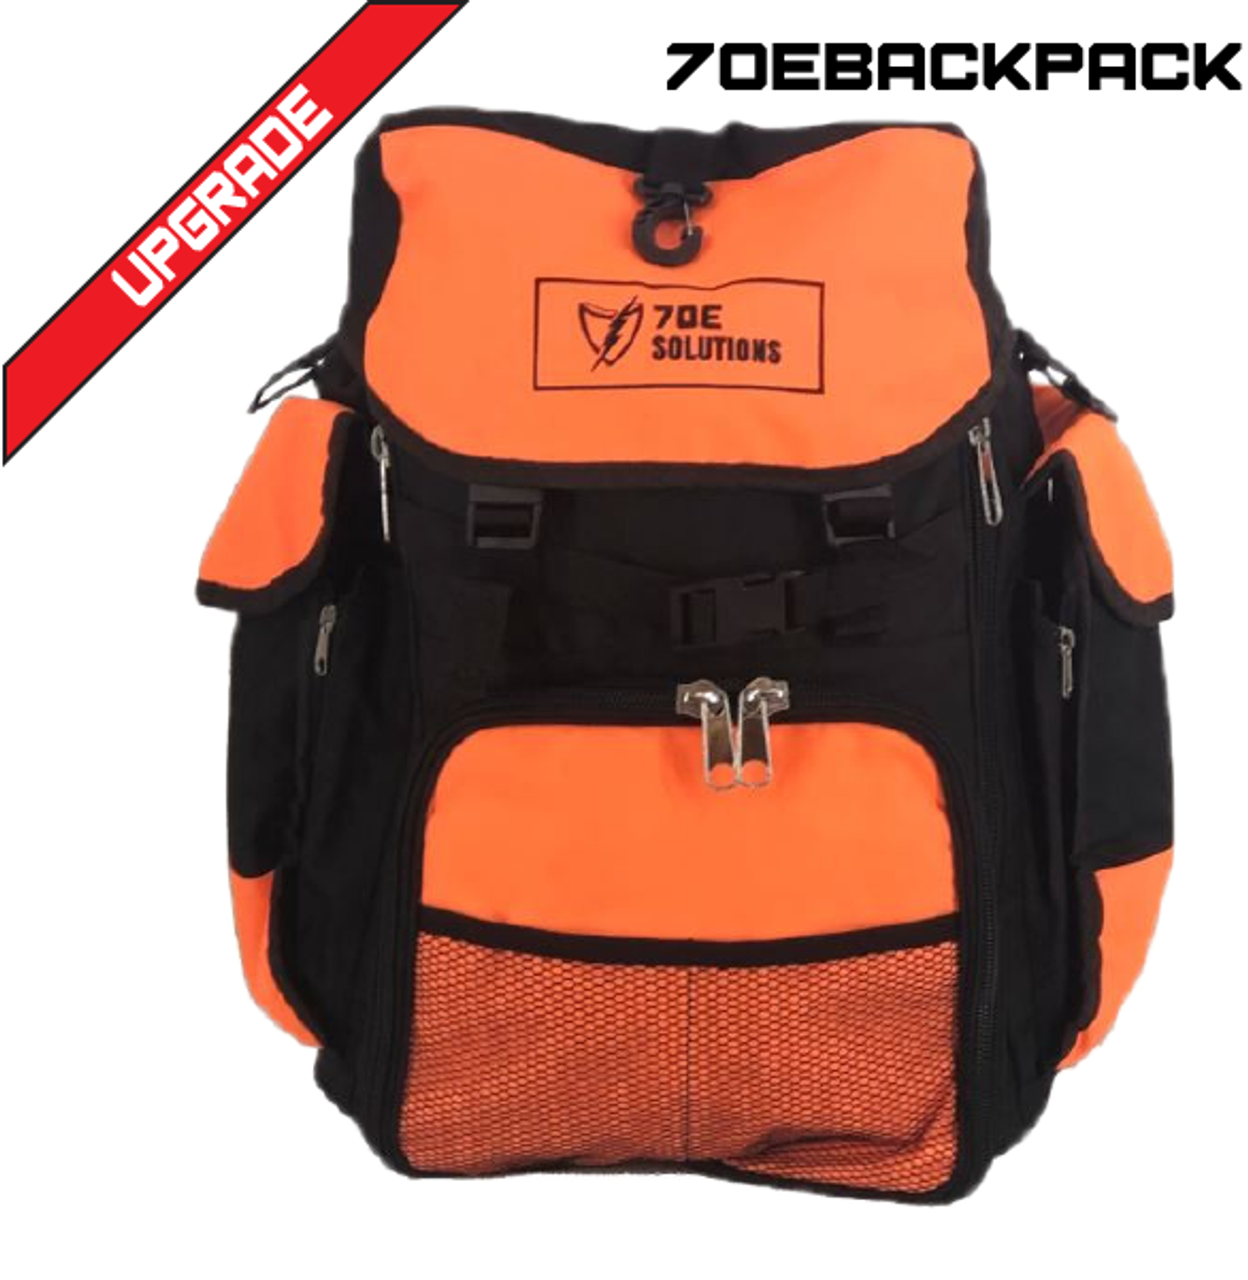 https://cdn11.bigcommerce.com/s-y4b1n34/images/stencil/1280x1280/products/1253/6129/Backpack_Upgrade__59293.1678902496.png?c=2?imbypass=on